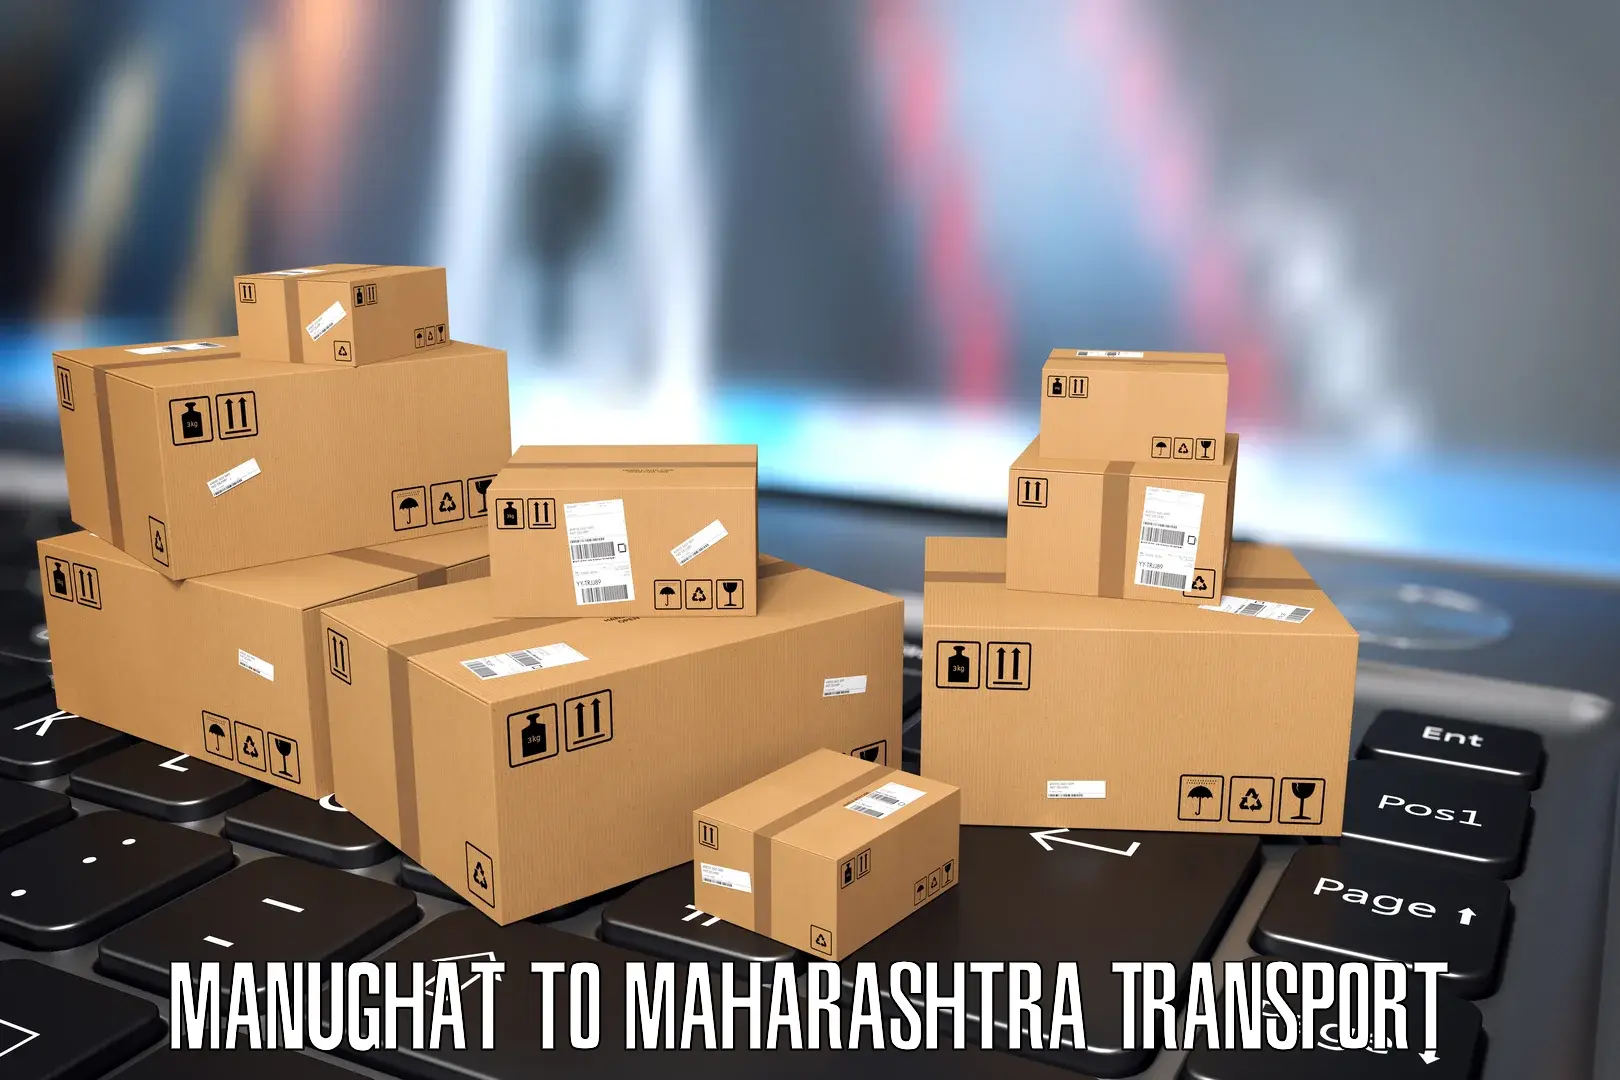 Container transport service Manughat to Lonar